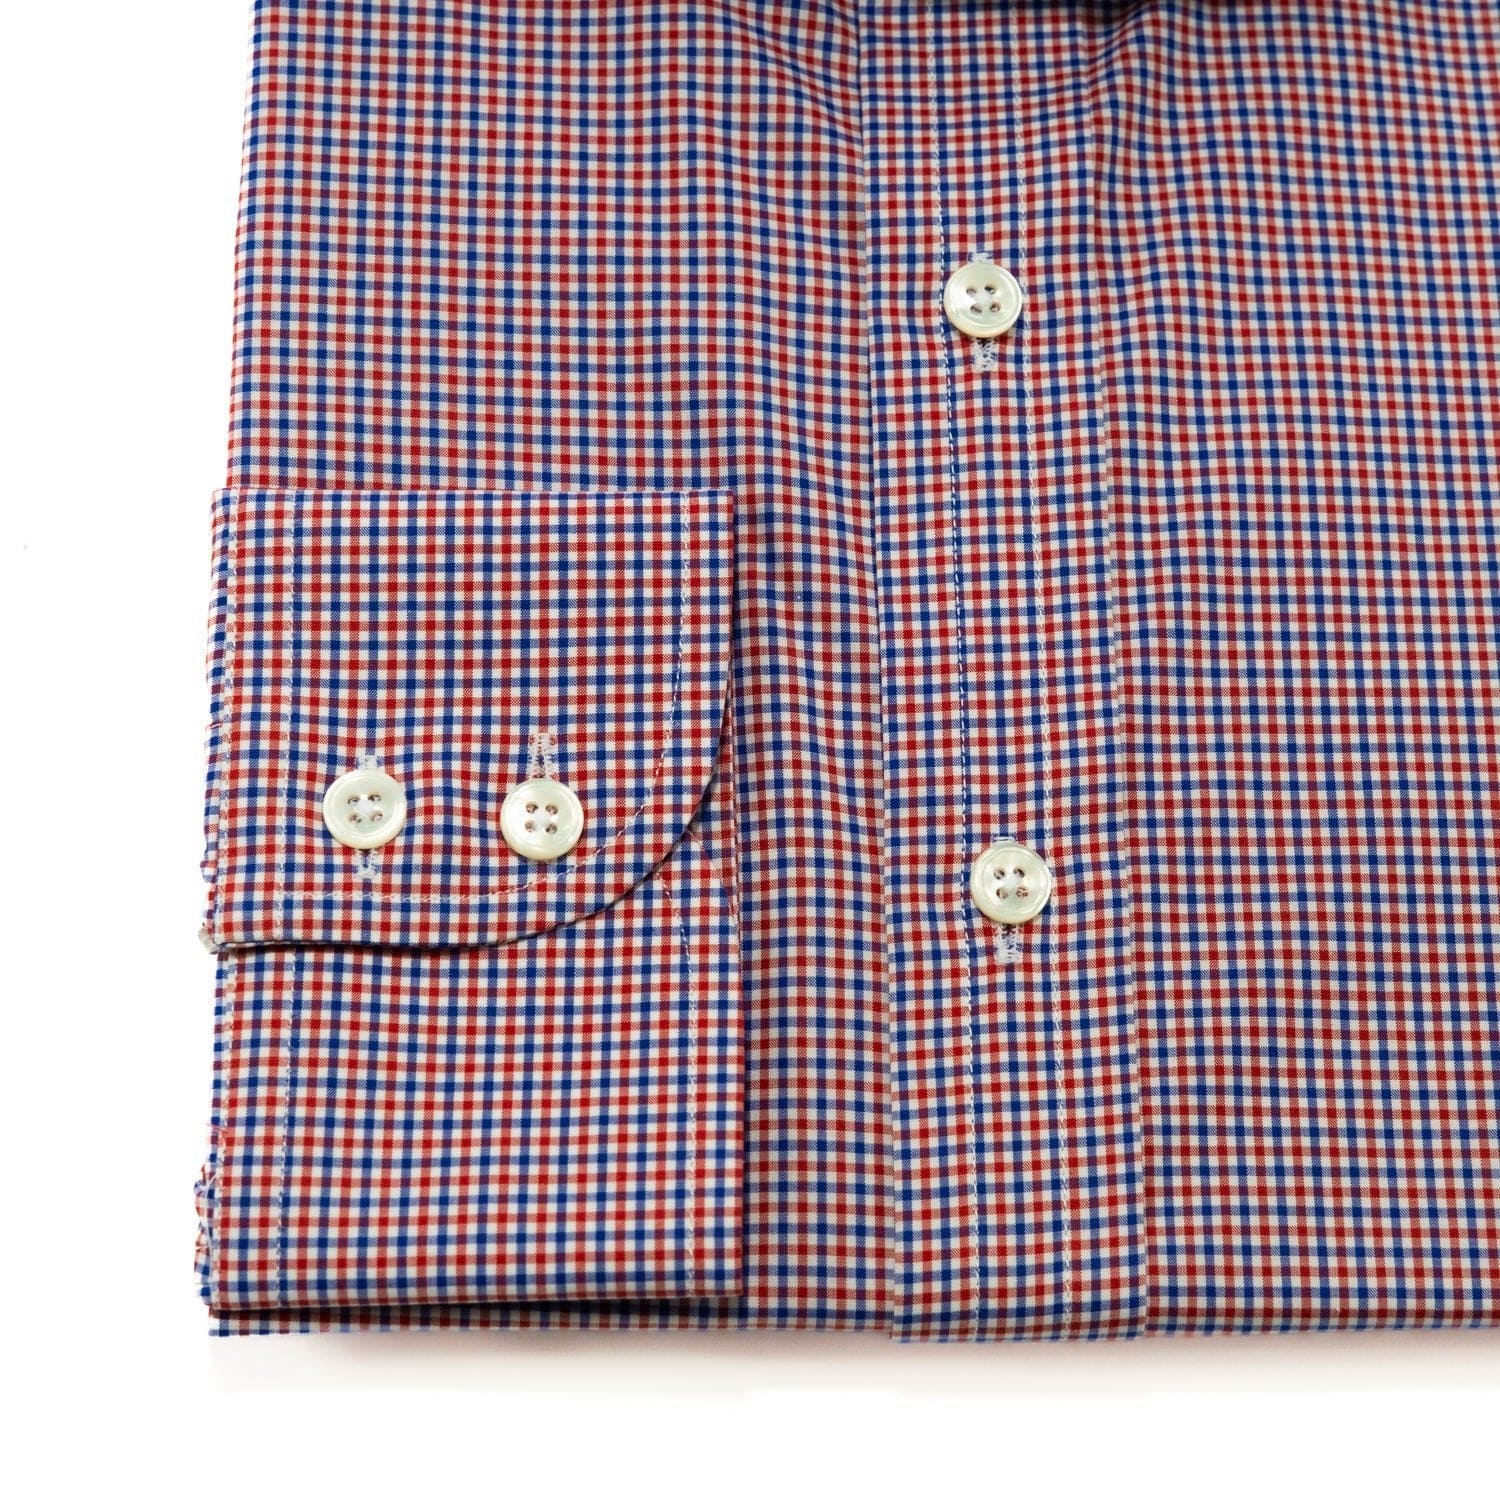 Contemporary Fit, Cutaway Collar, 2 Button Cuff Shirt in Red, Sky Blue & White Check